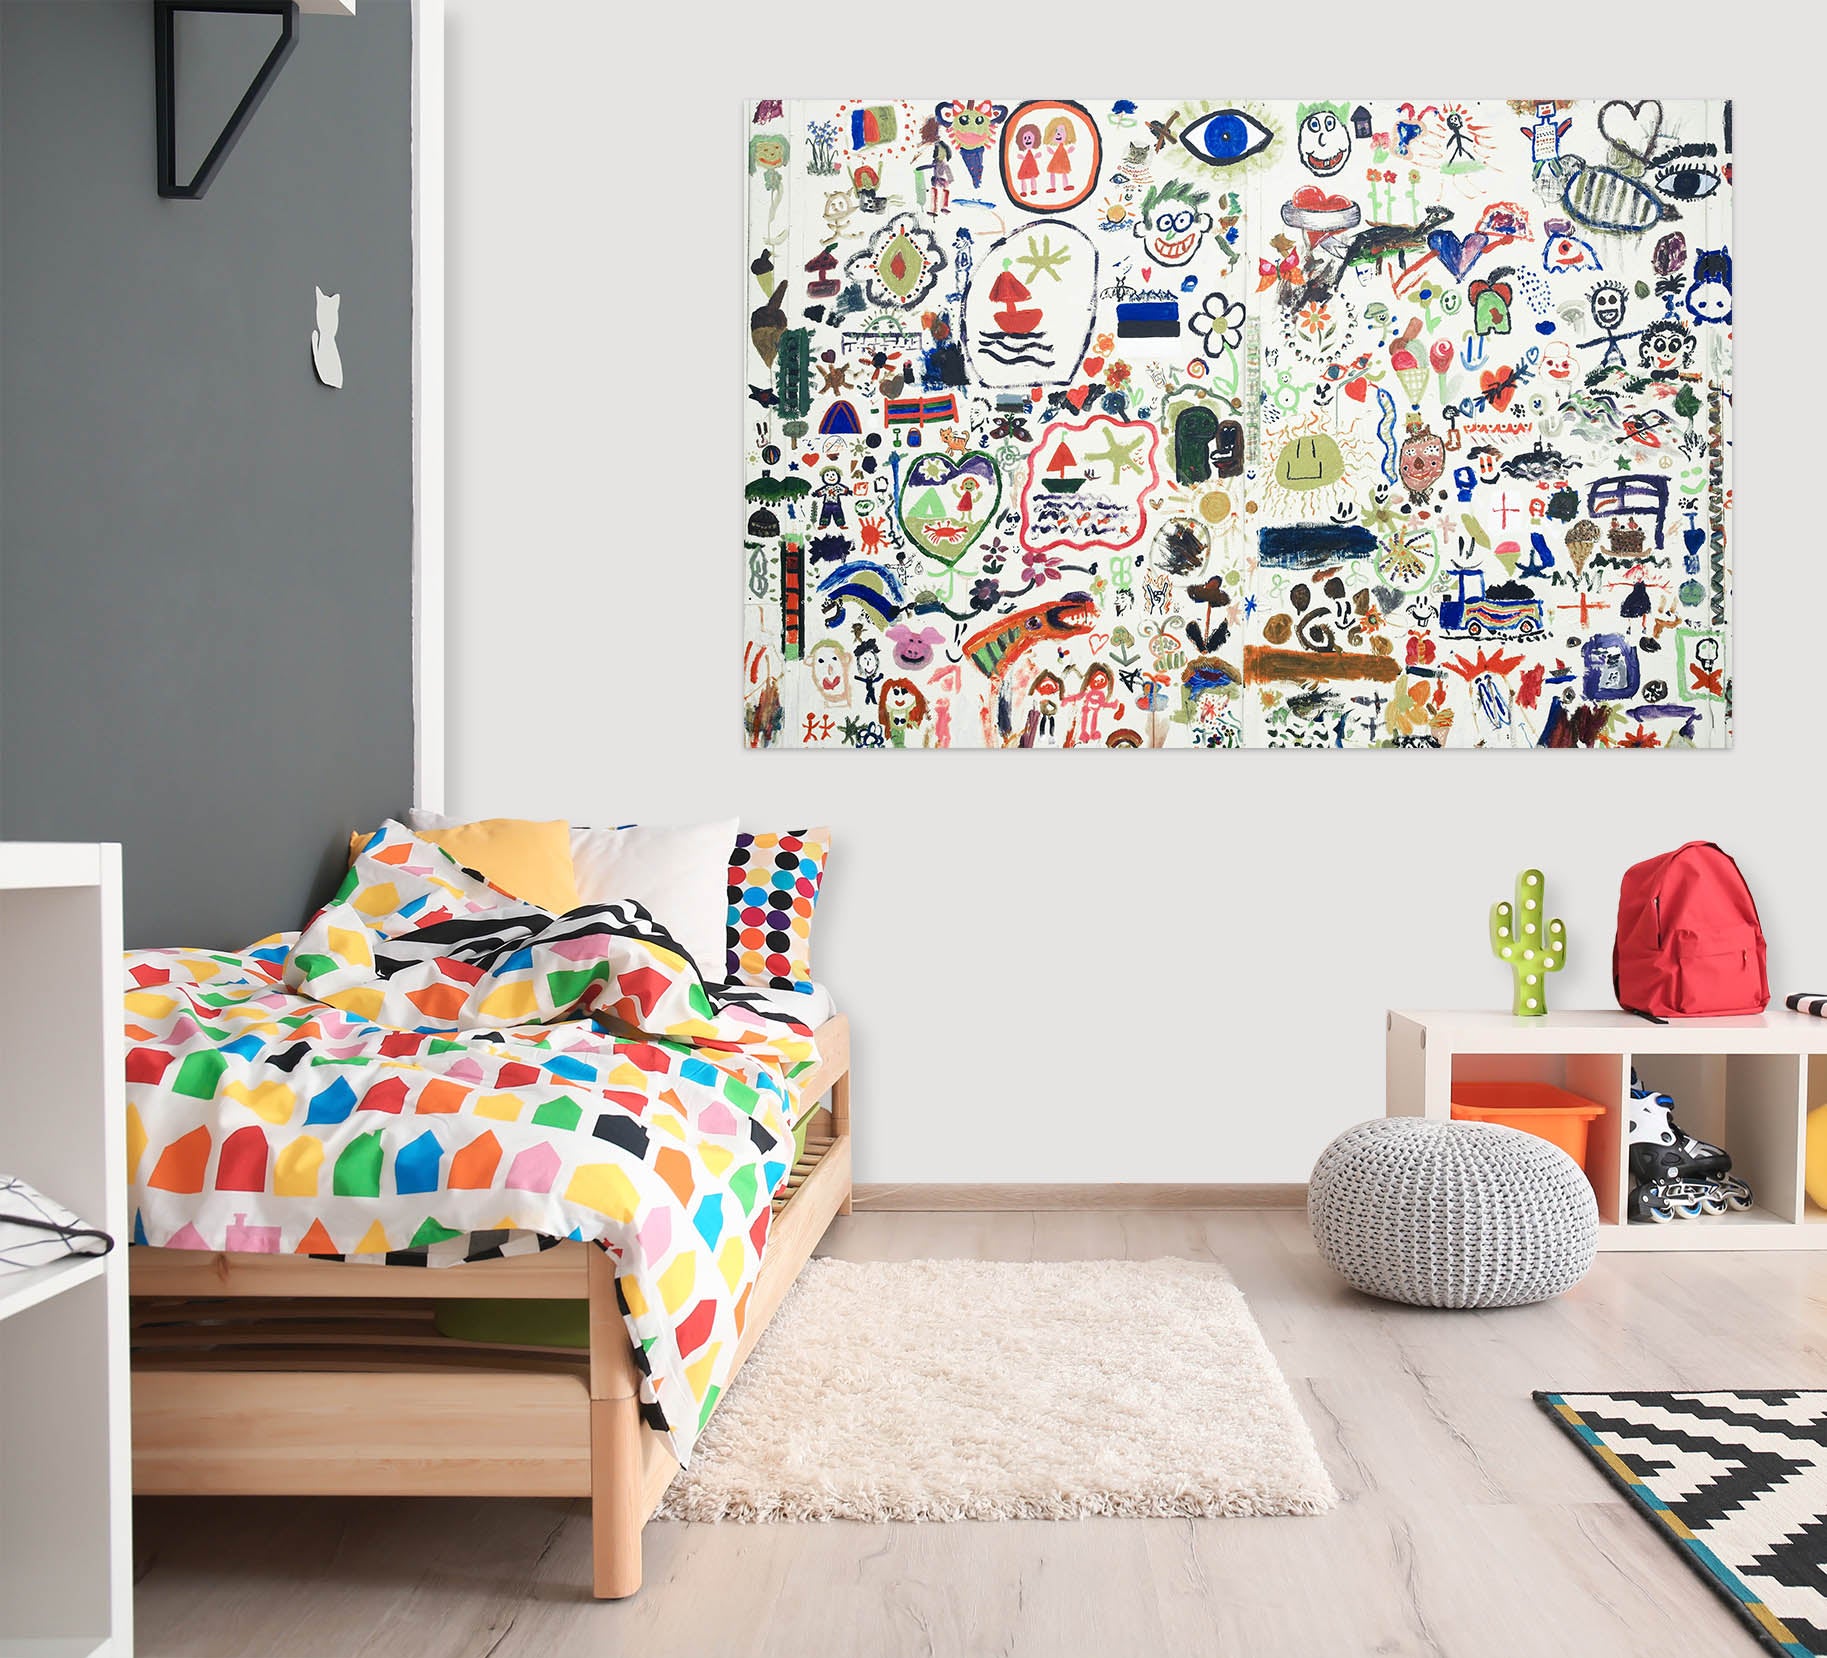 3D Wall Painting Crayon 1068 Wall Sticker